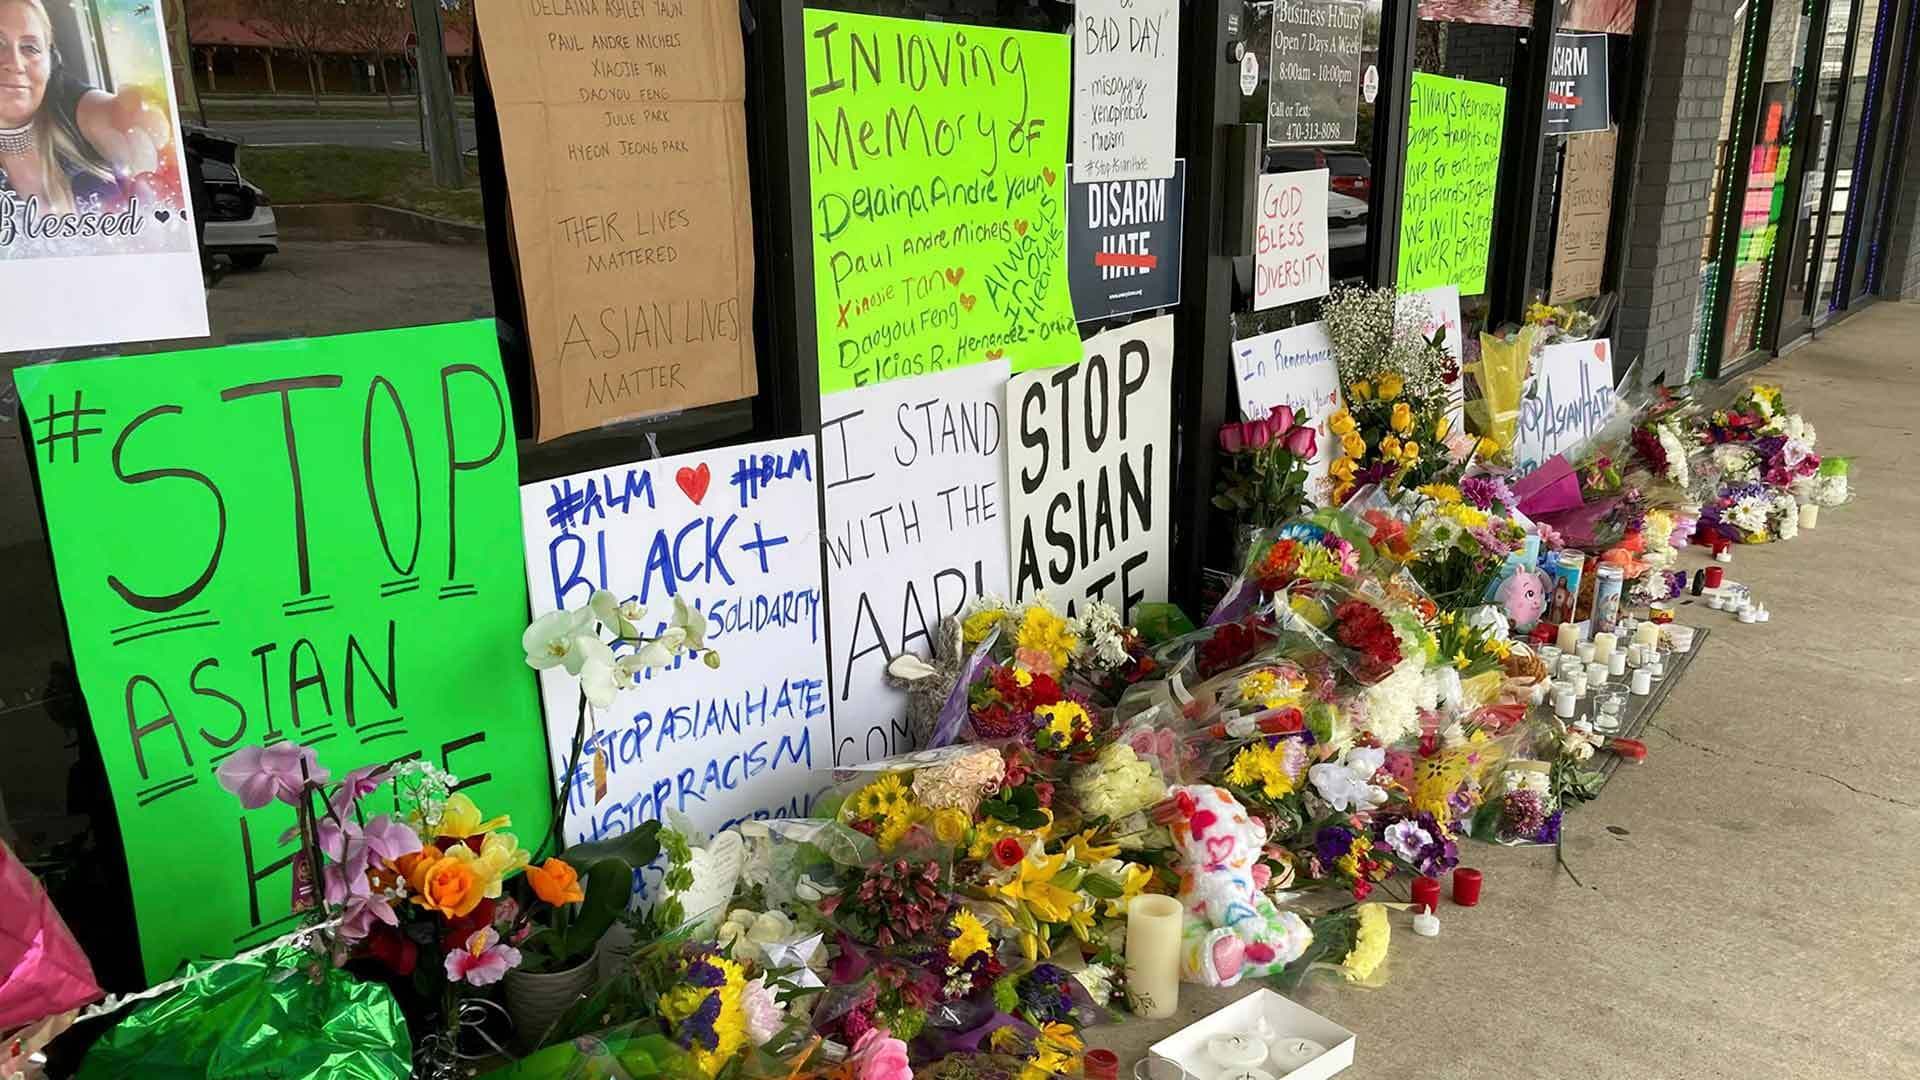 Memorial with flowers and "Stop Asian hate" signs